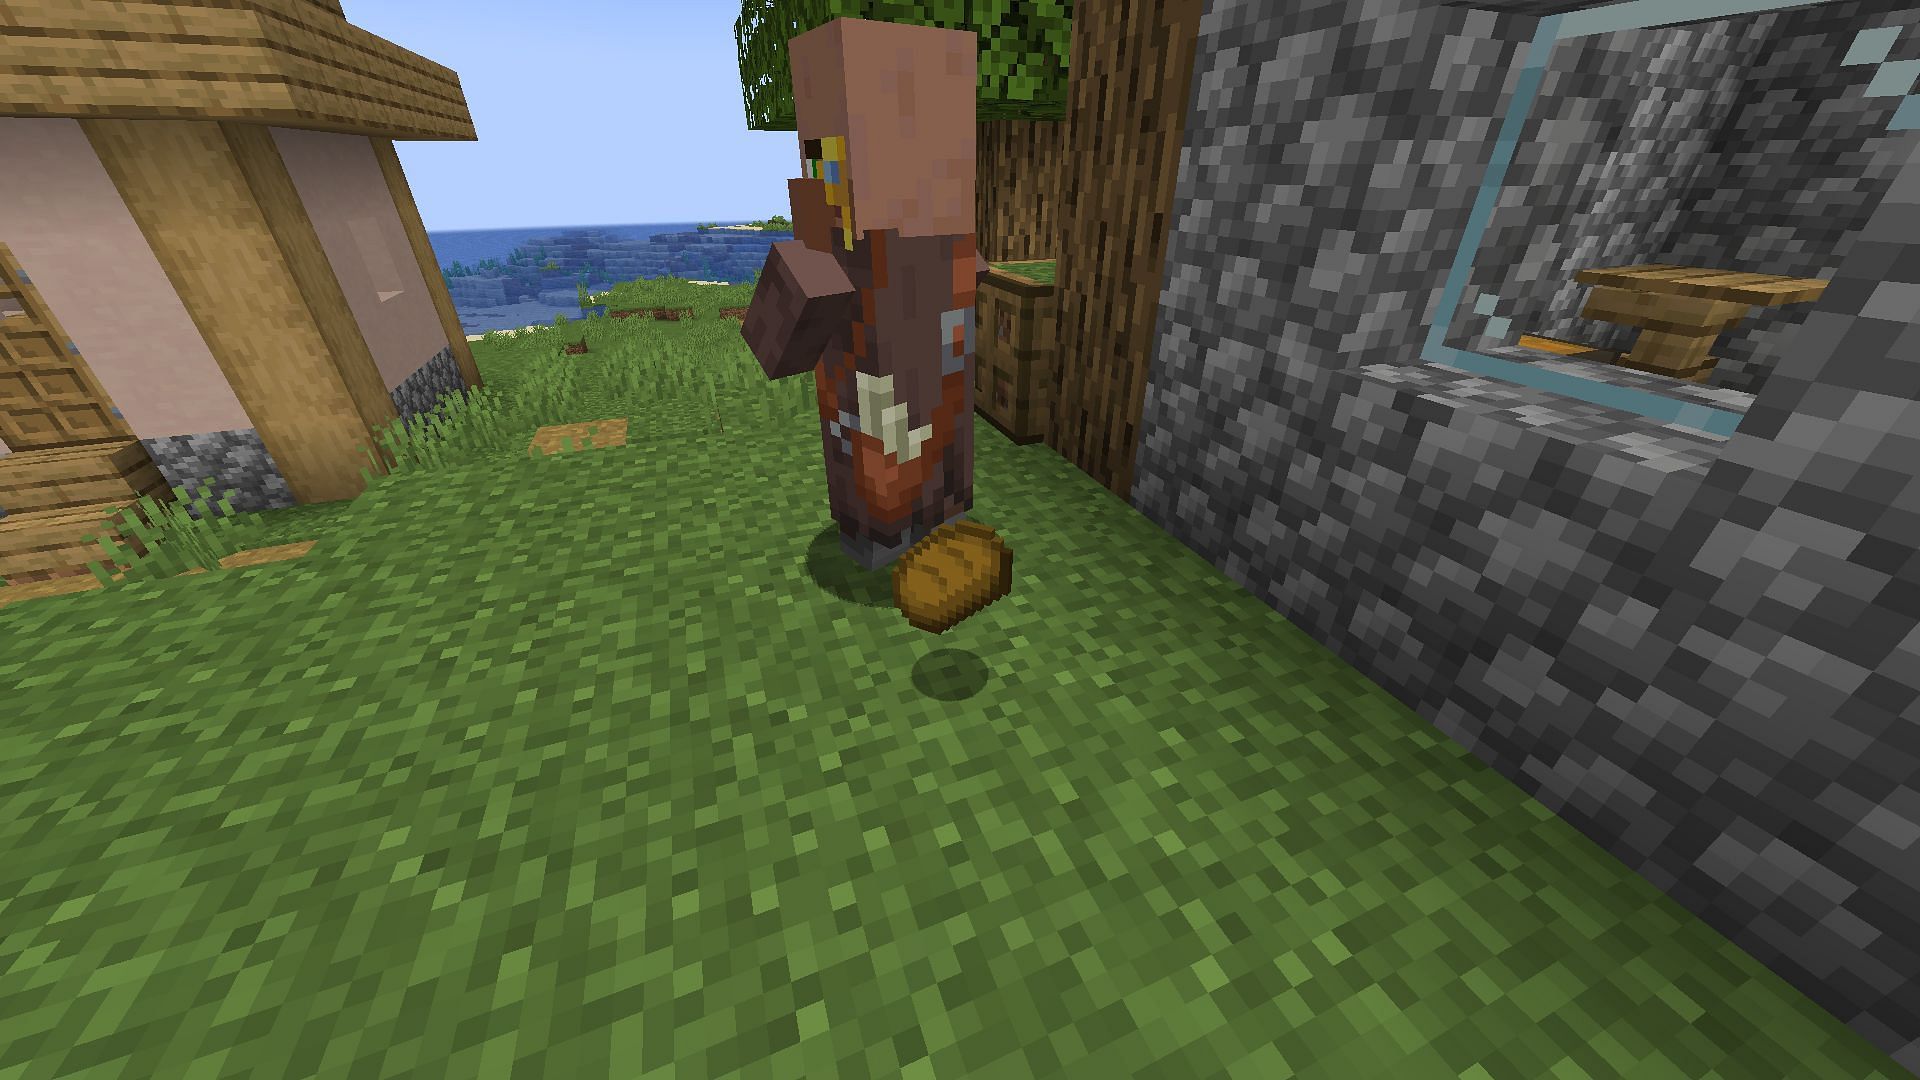 Players must give each Villager a set amount of food items in Minecraft (Image via Mojang)